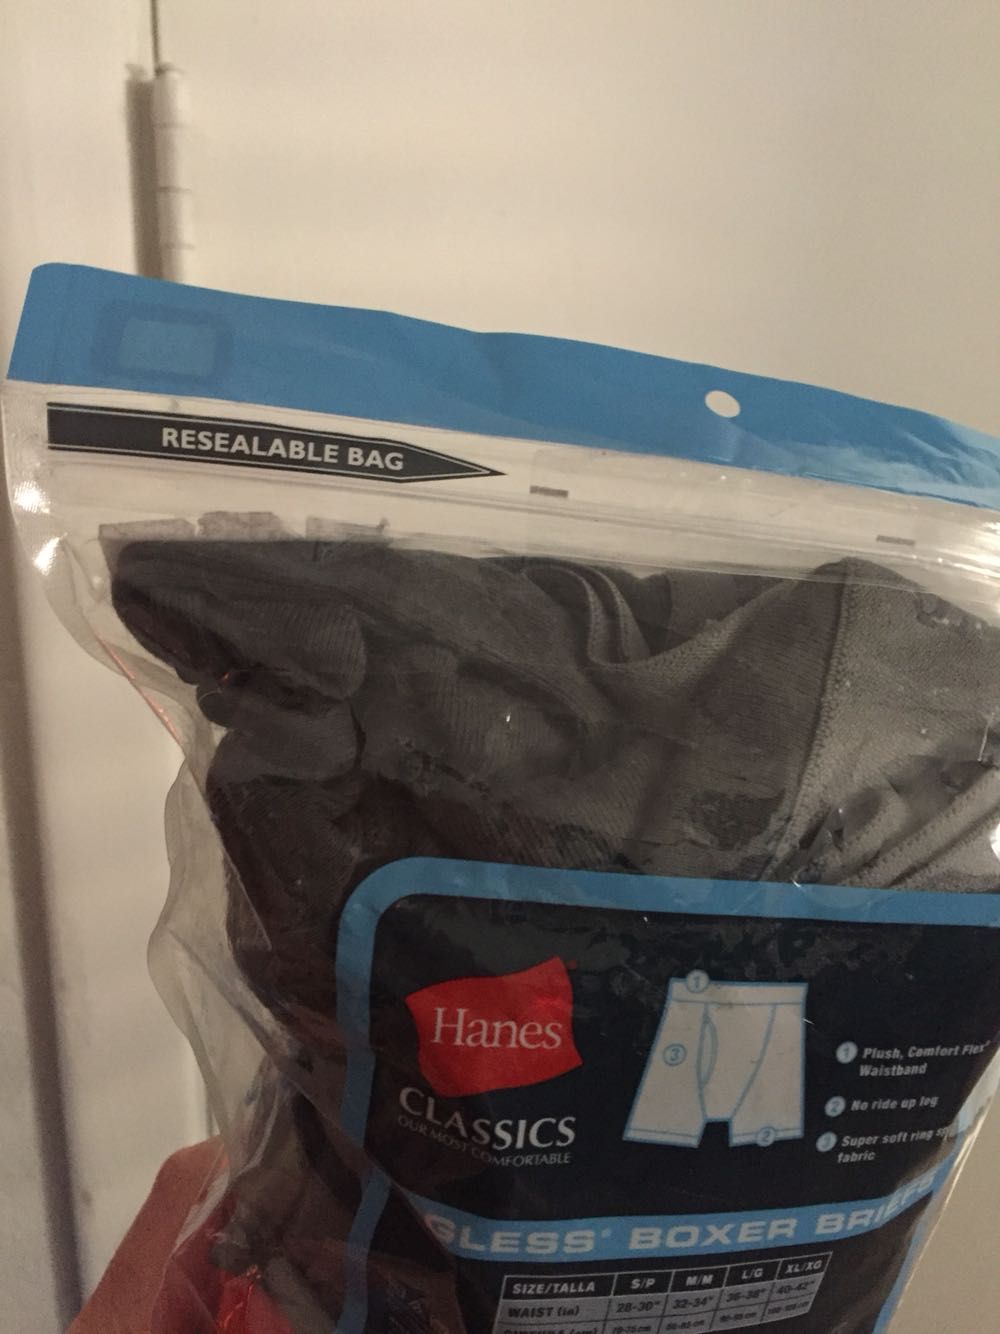 My briefs came in a resealable bag. But why?